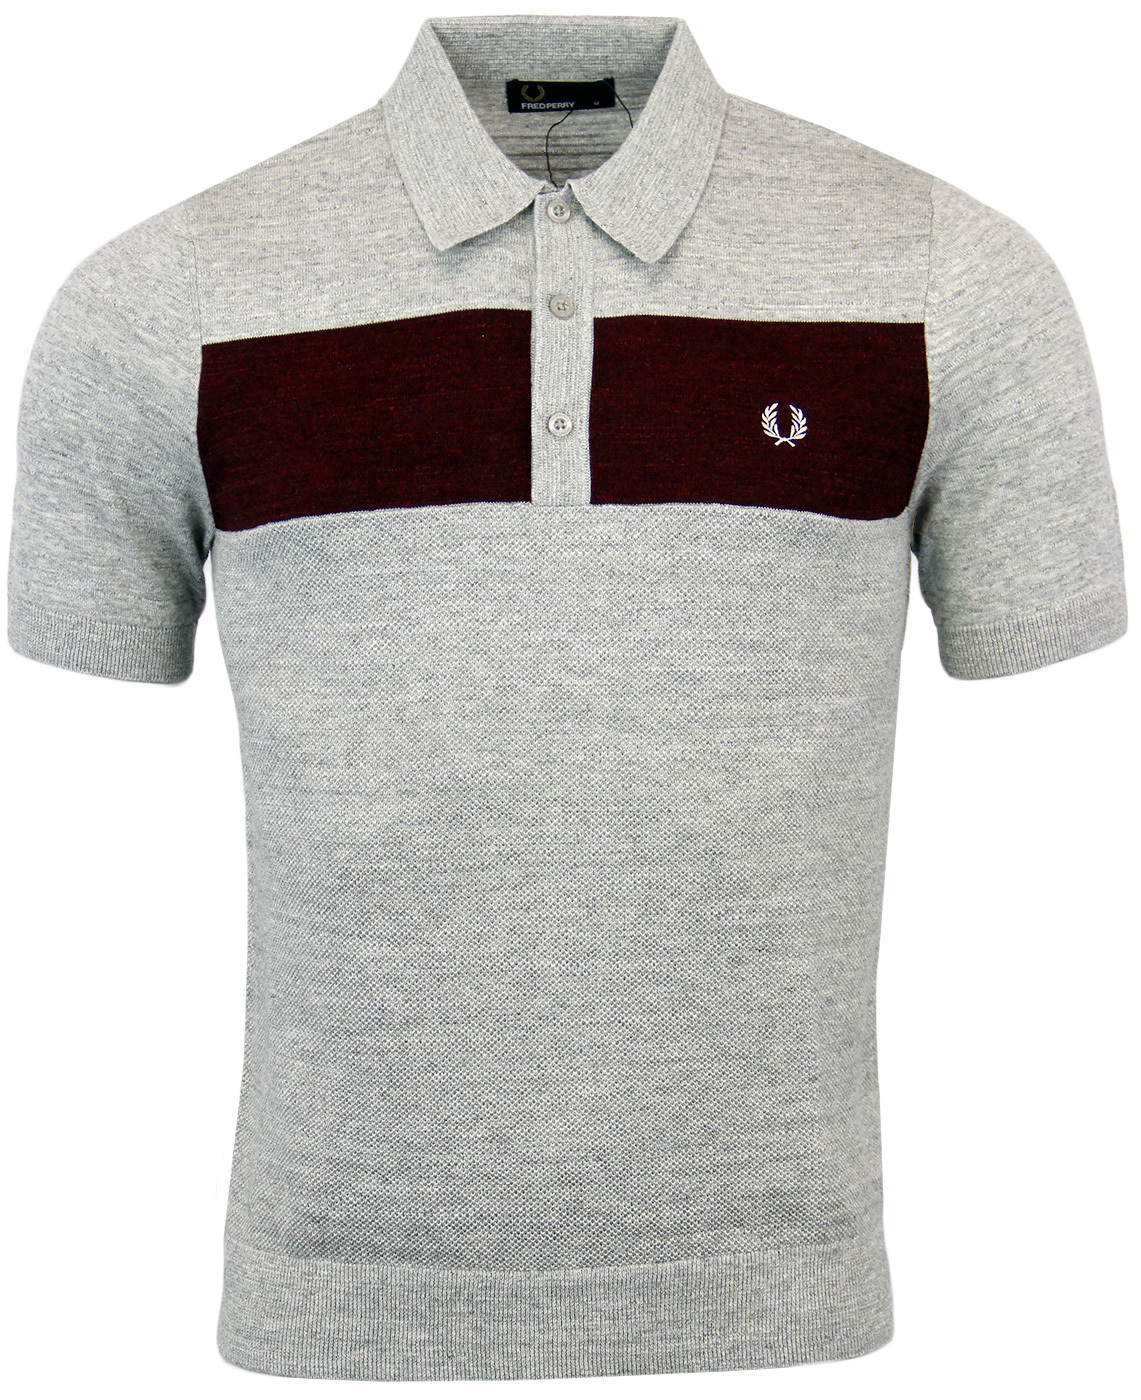 FRED PERRY Knitted Chest Panel Mod Polo Shirt